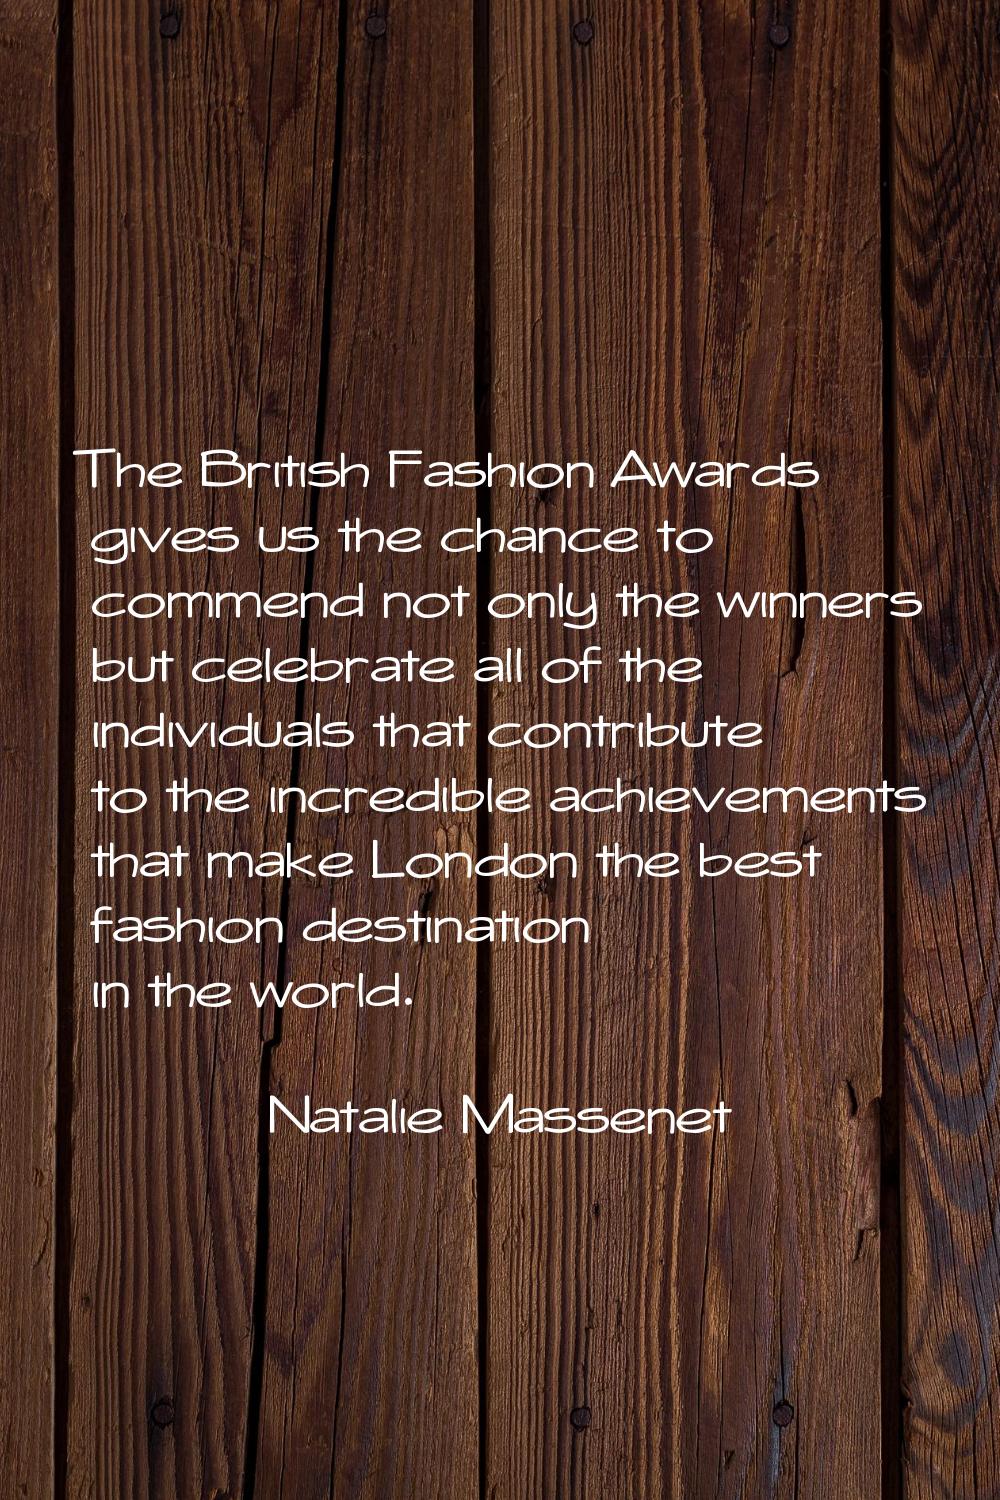 The British Fashion Awards gives us the chance to commend not only the winners but celebrate all of